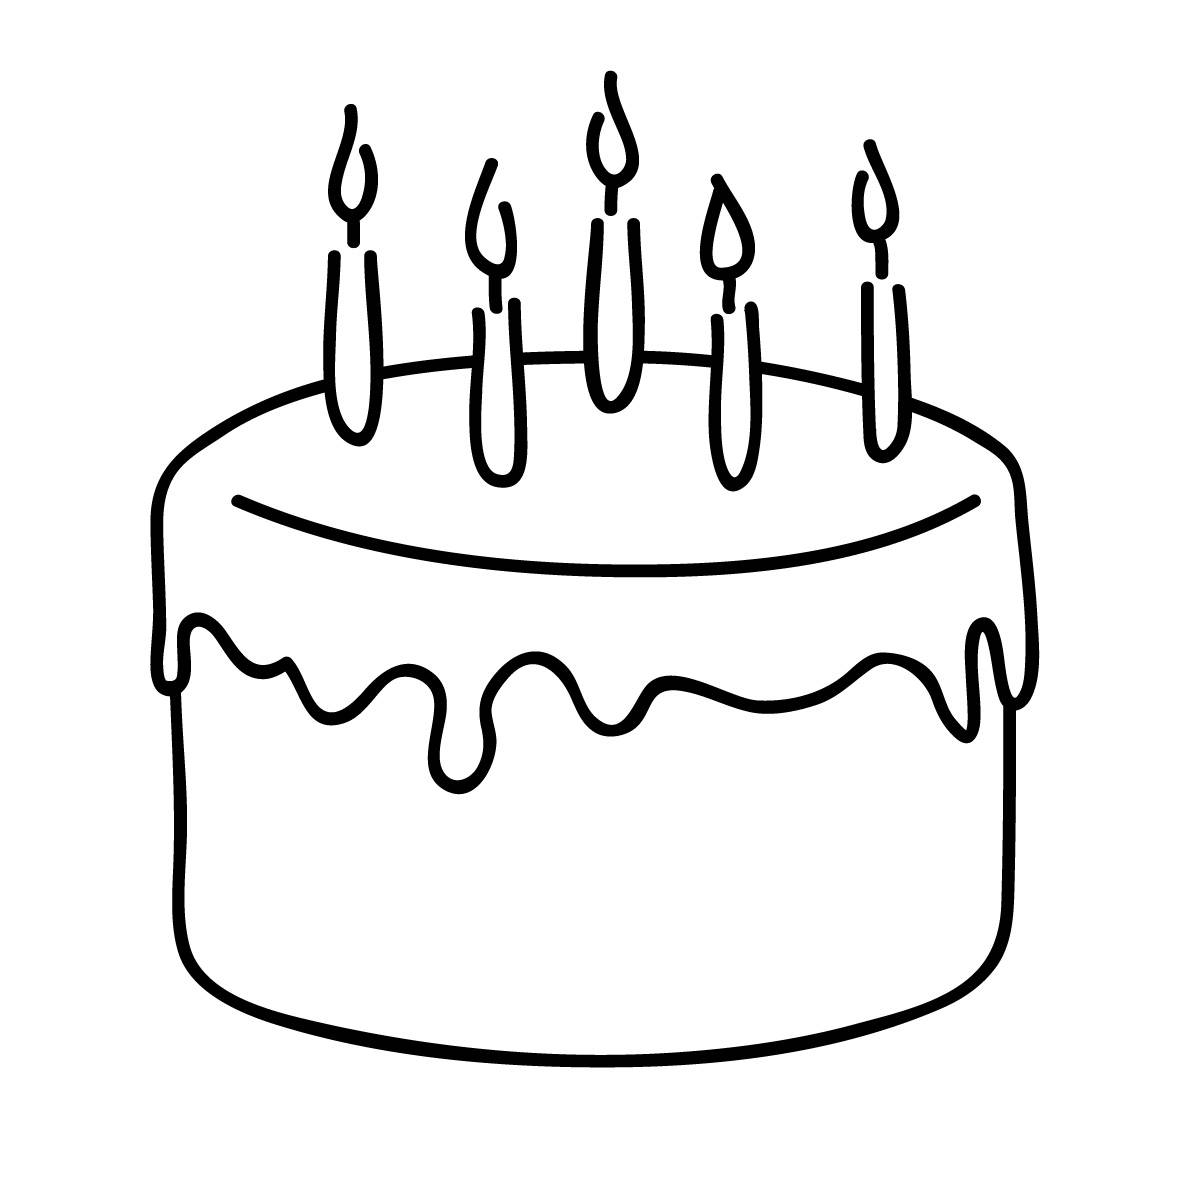 18 21st Birthday Clipart Free Cliparts That You Can Download To You